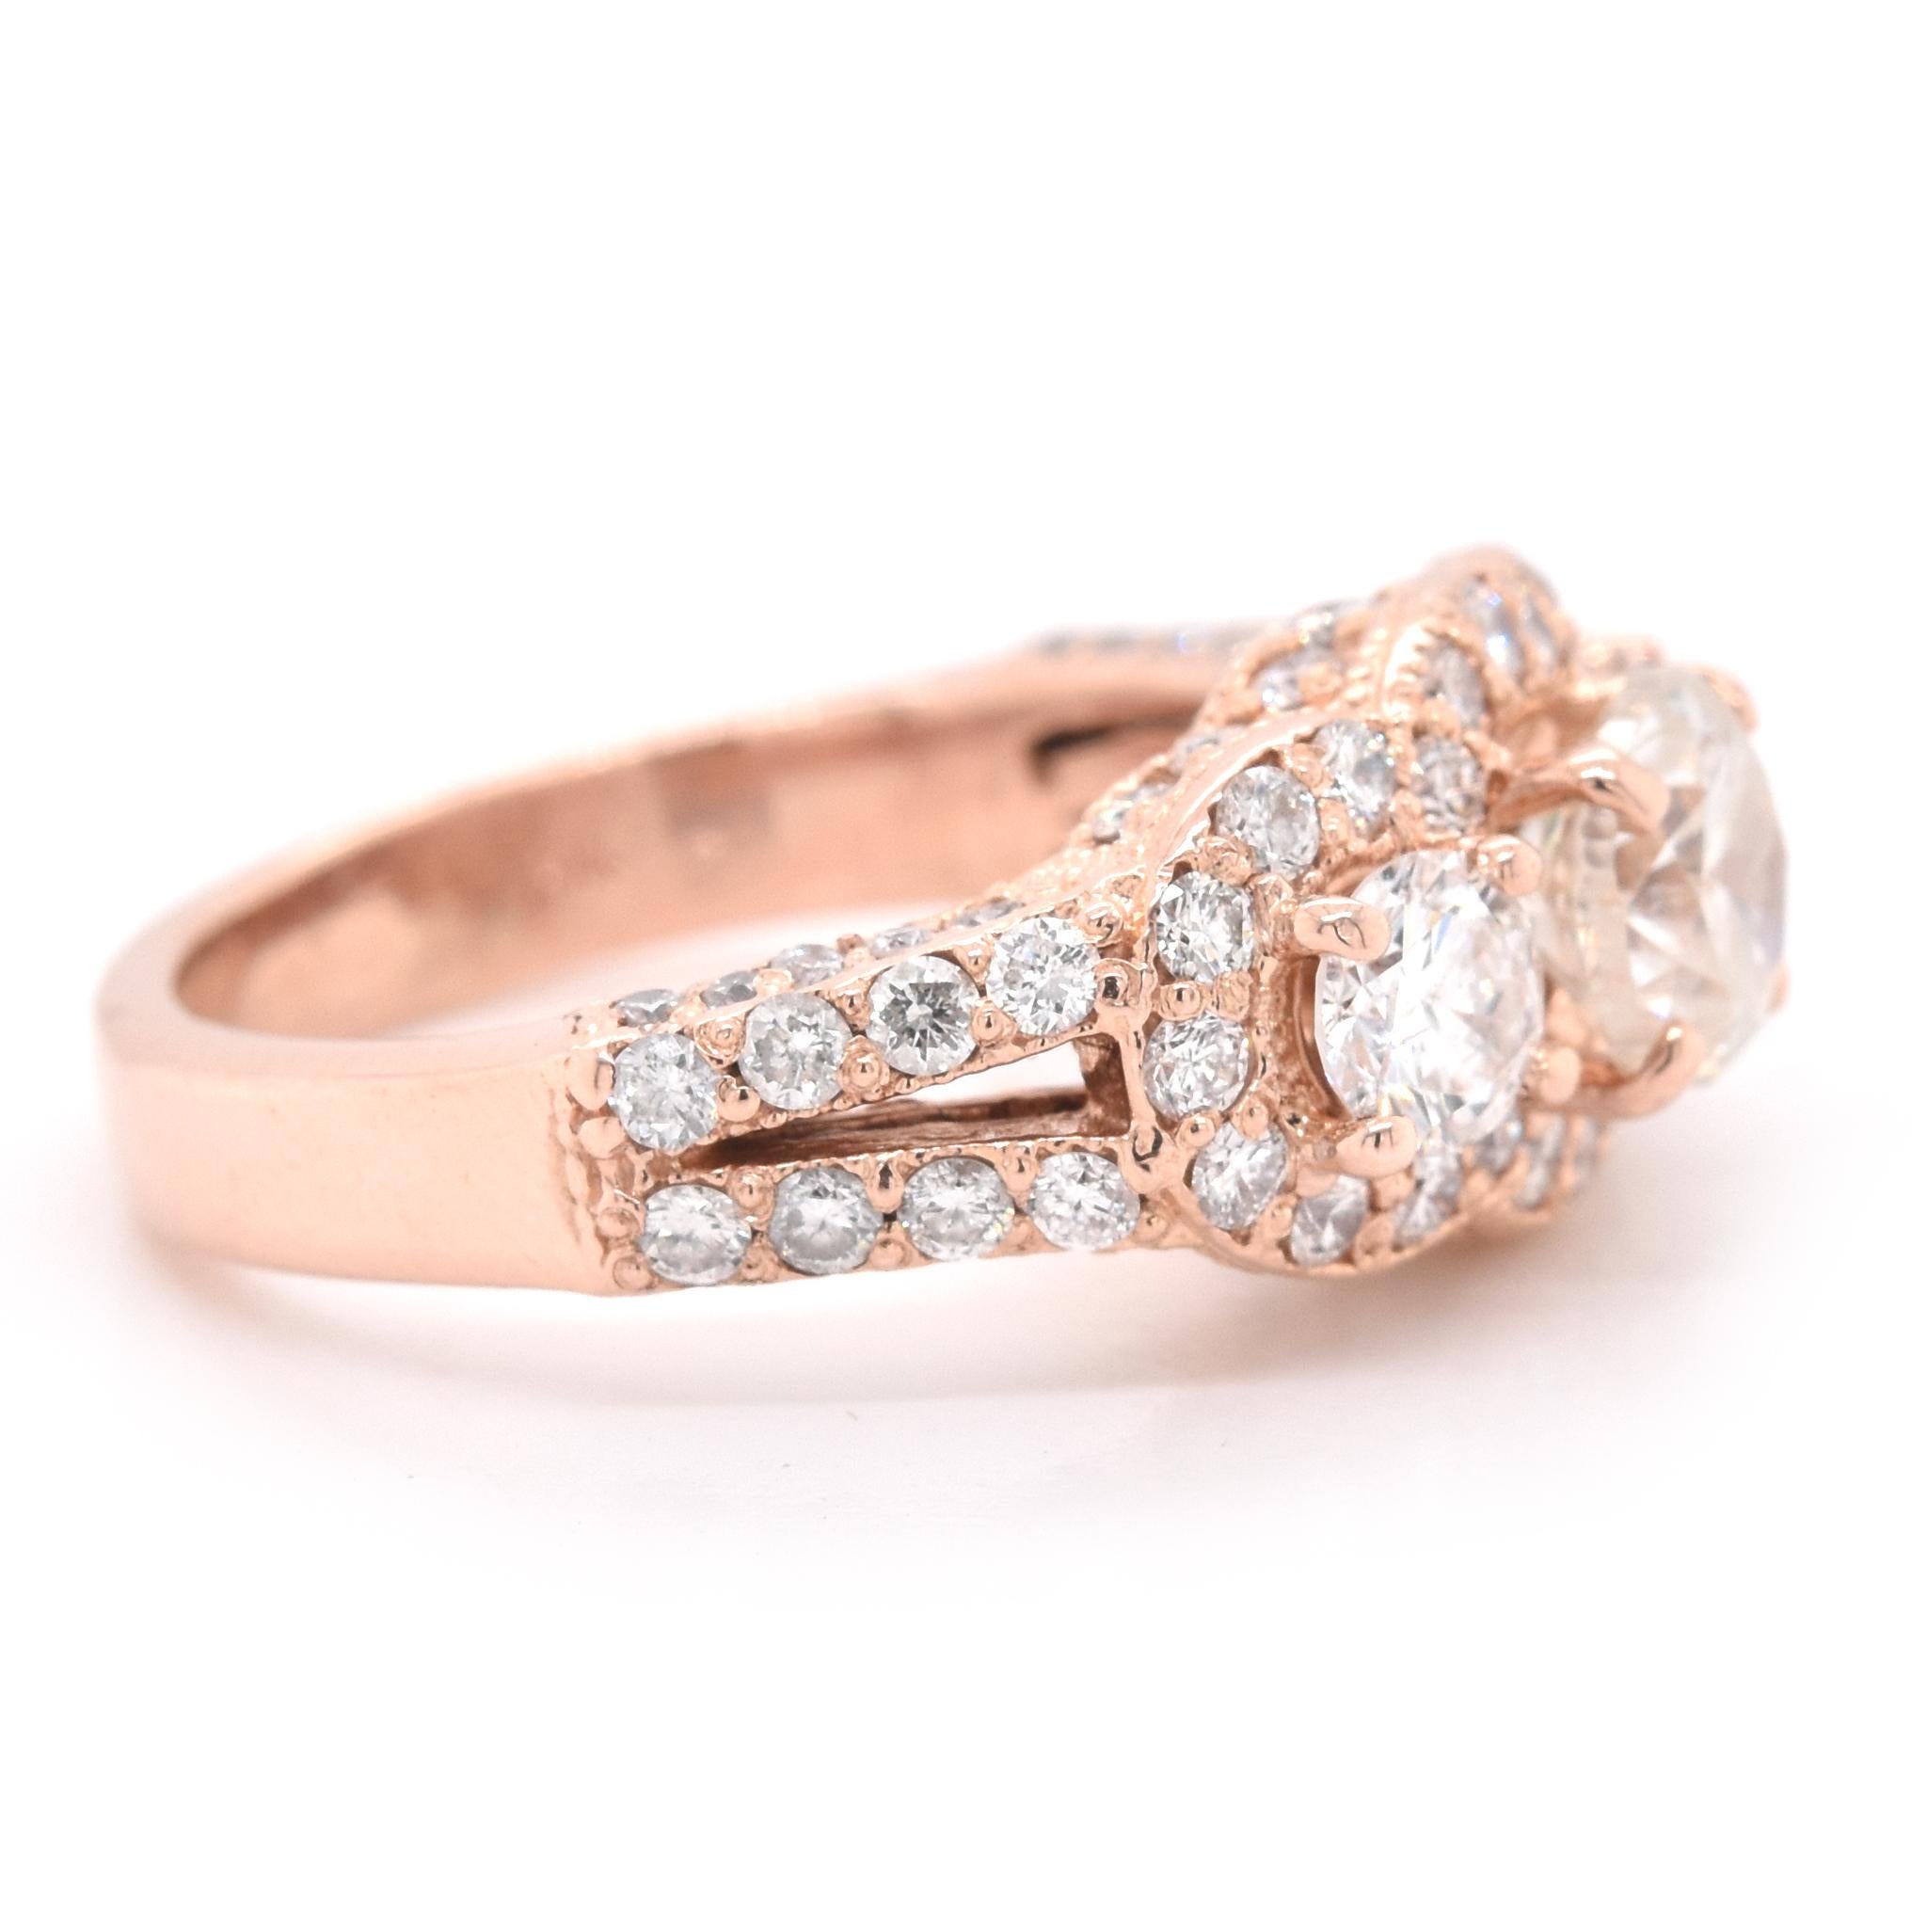 Designer: custom designed
Material: 14 Karat Rose Gold
Center Diamond: 1 round brilliant cut = .97ct
Color: L
Clarity: I1
Accent Diamonds: 76 round brilliant cut = 2.69cttw
Color: H/J 
Clarity: SI2
Ring Size: 3 (please allow two additional shipping